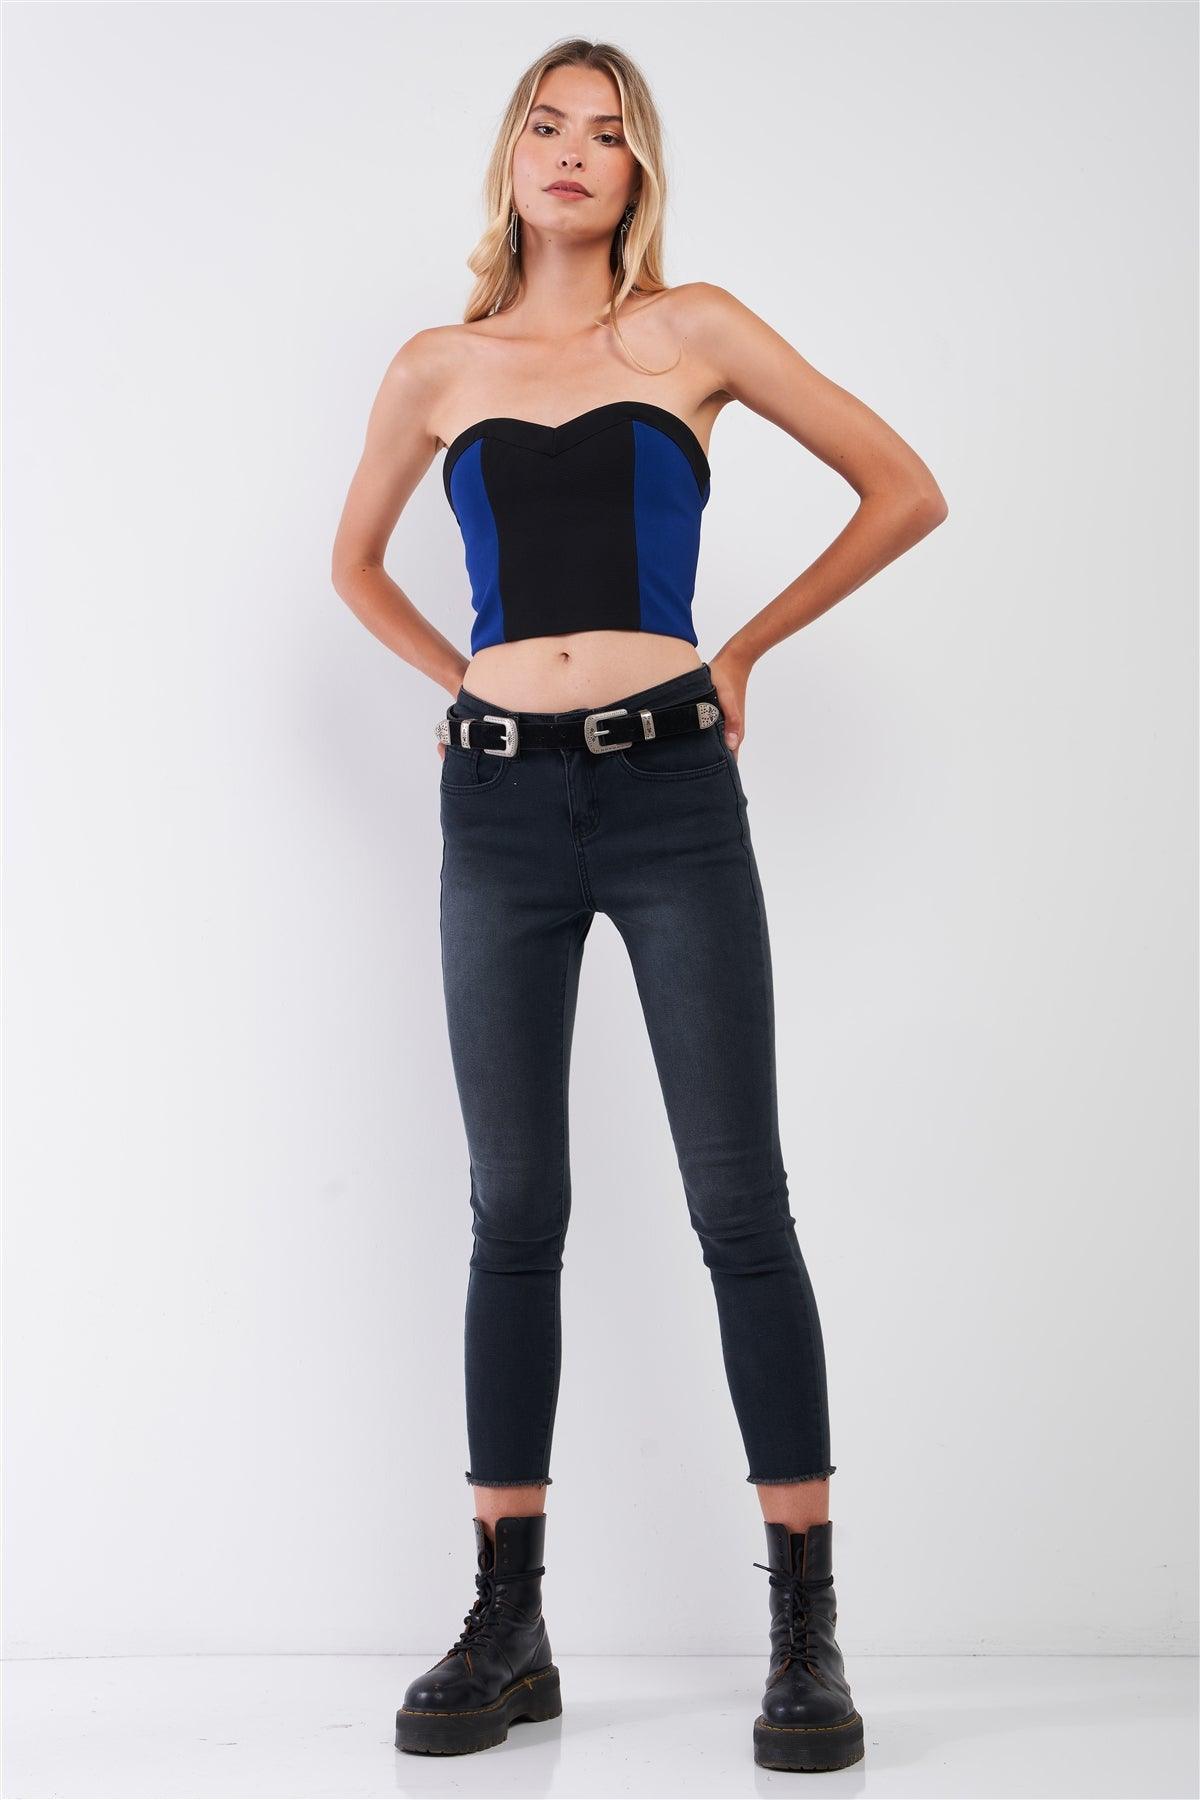 Black & Blue Colorblock Sweetheart Strap/Strapless Convertible Cropped Top /1-2-3